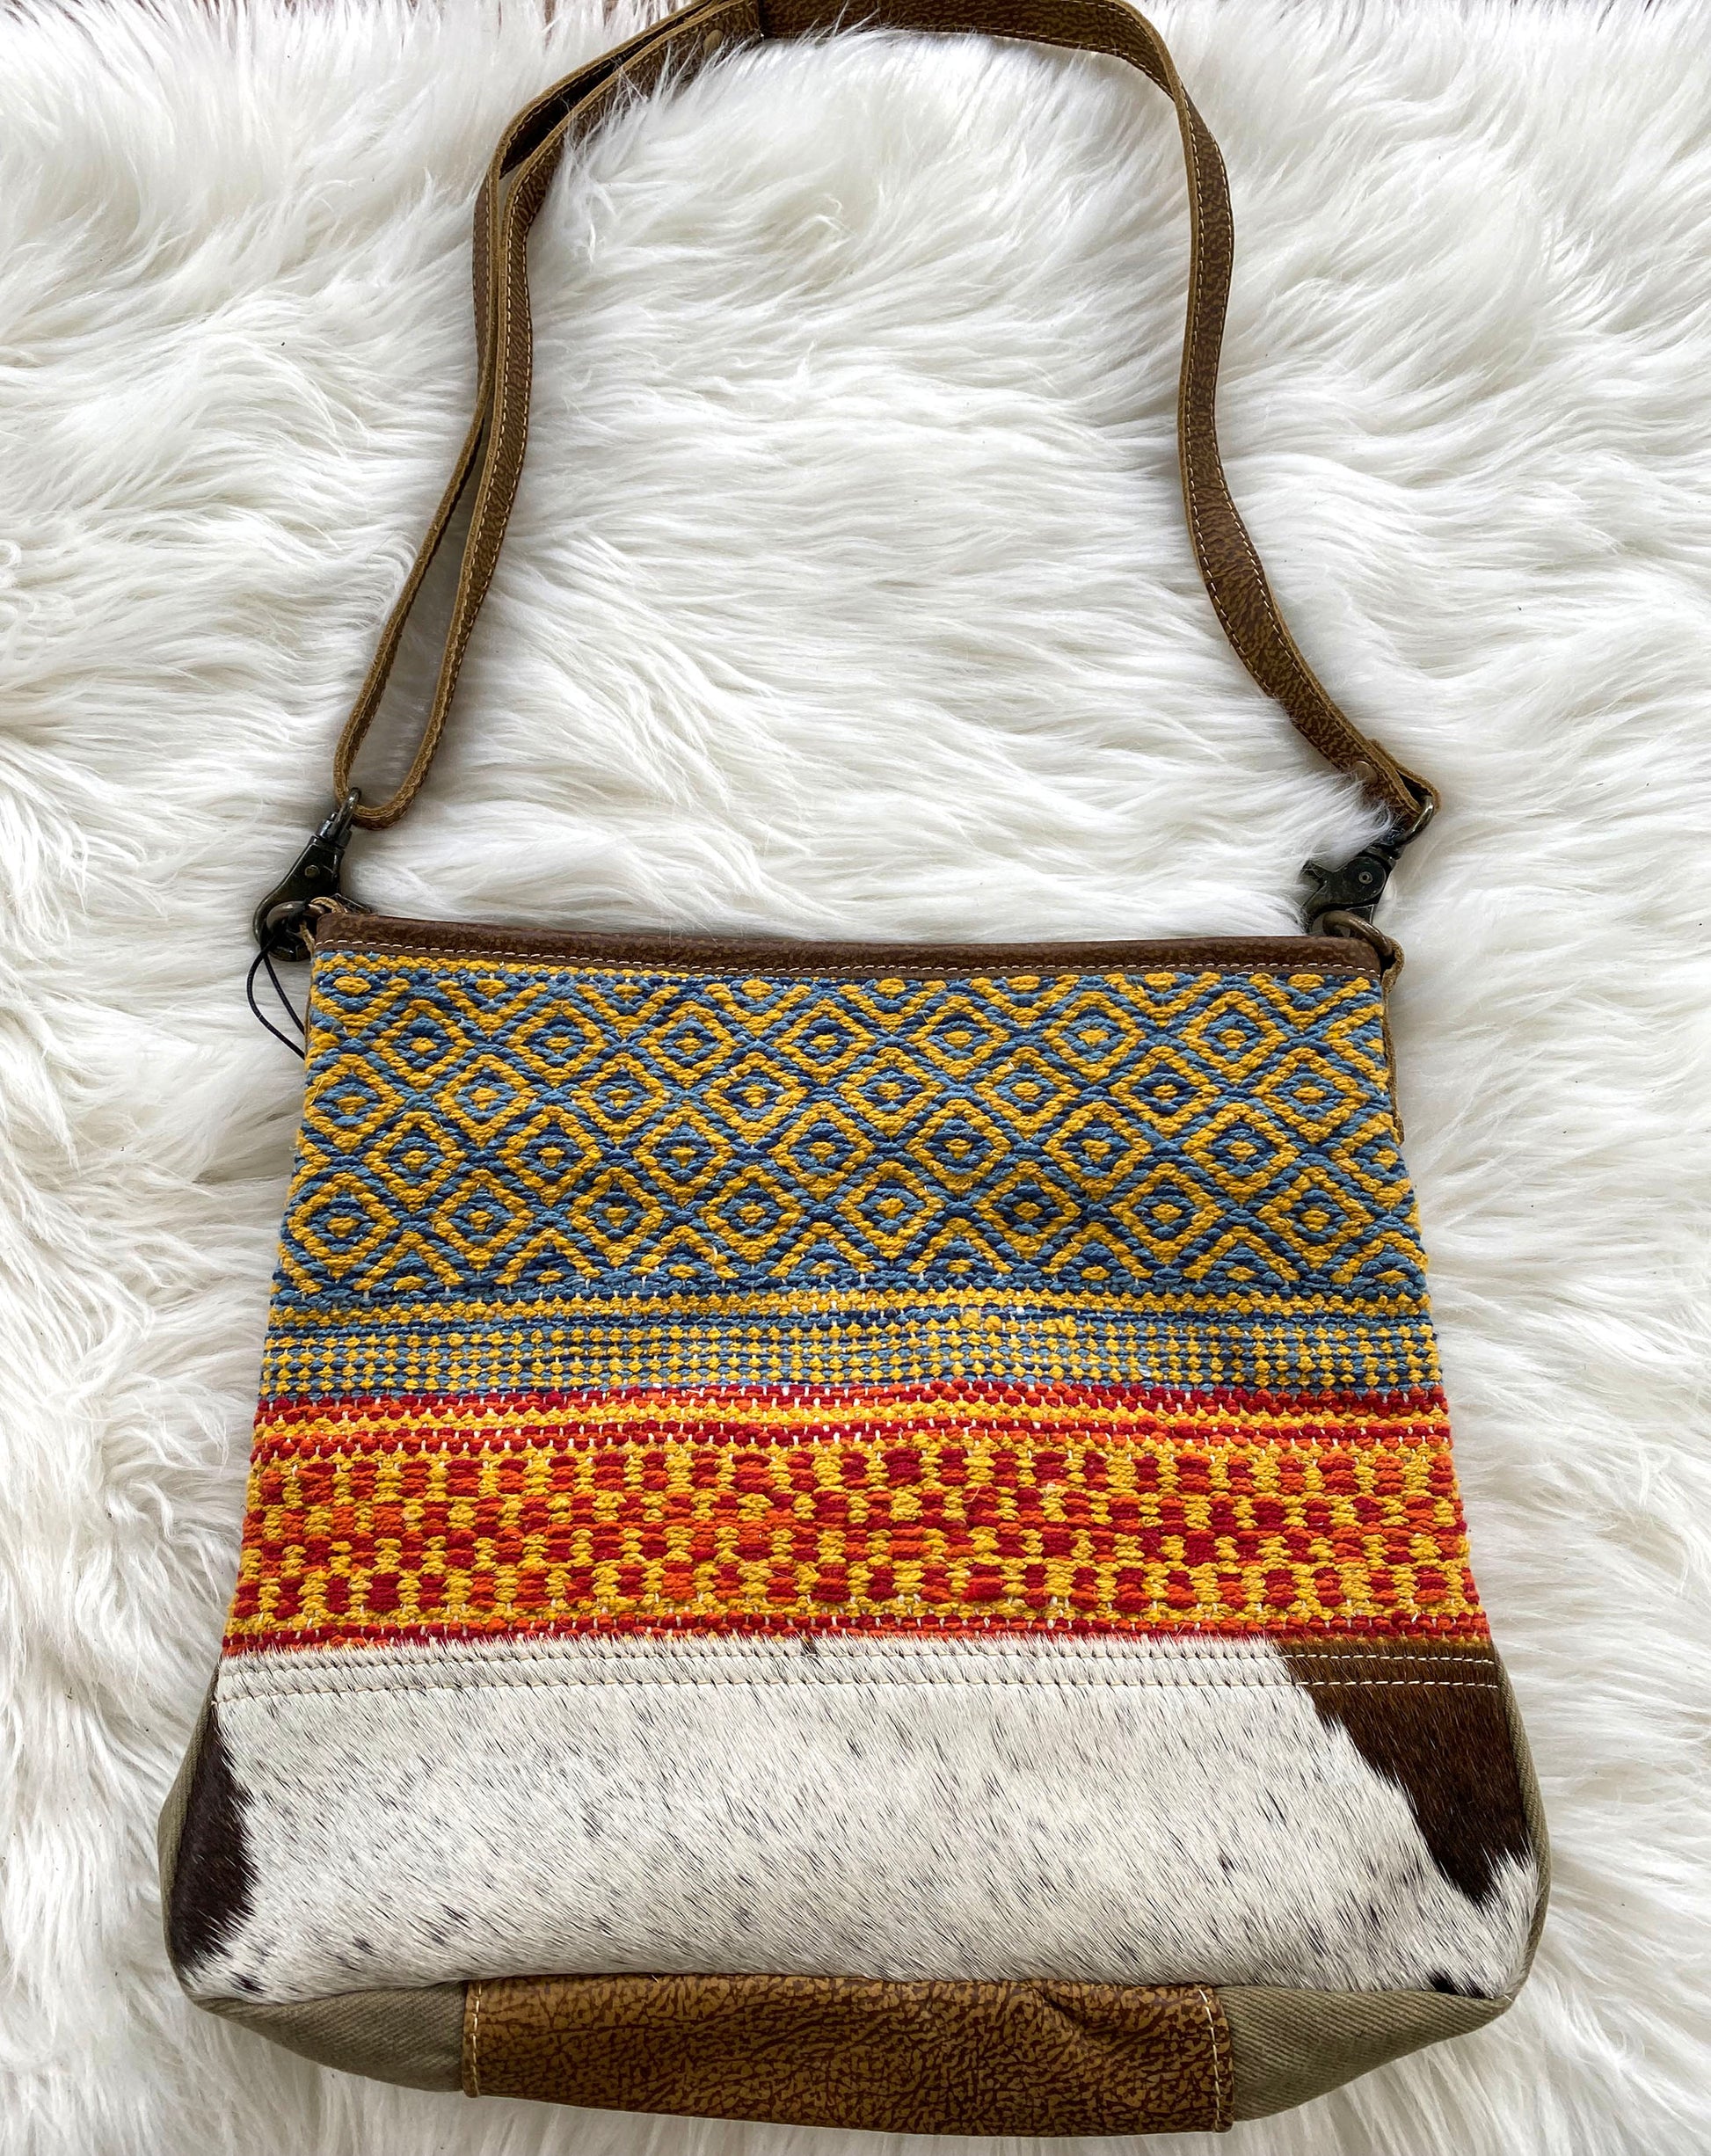 Tan Myra colorful leather and hair on cowhide shoulder bag with recycled colorful red and turquoise fabric